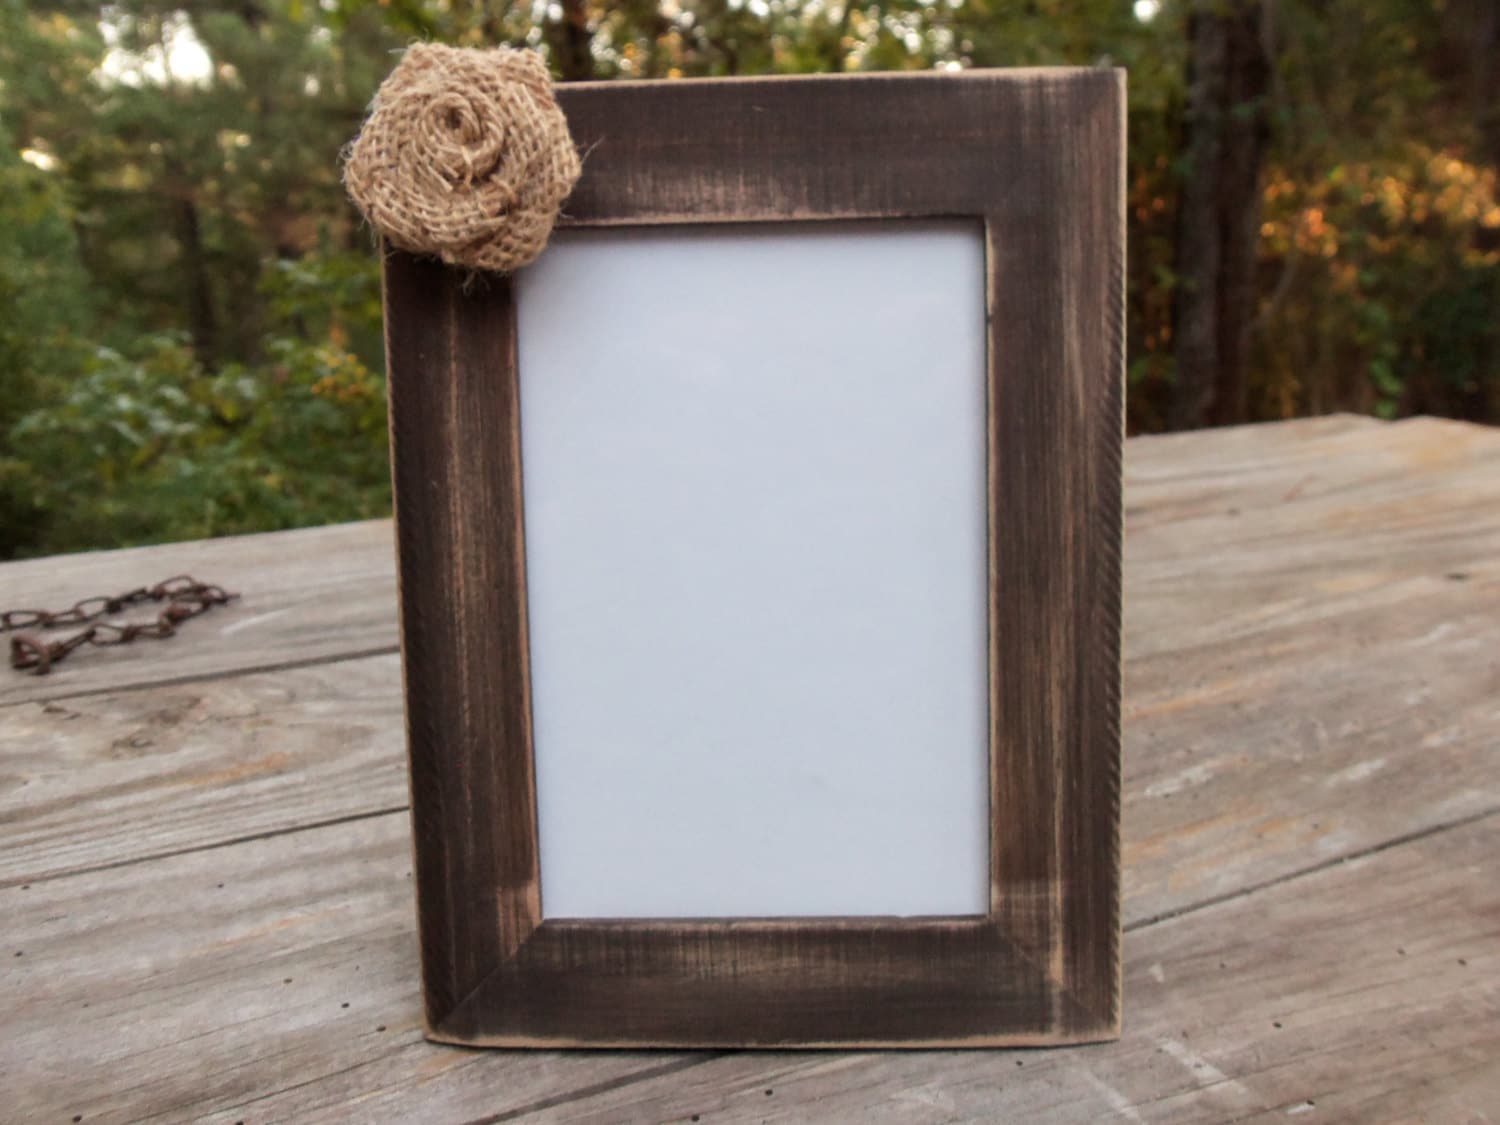 Rustic Shabby Chic Picture FRAME - with Cute Burlap Flower decoration